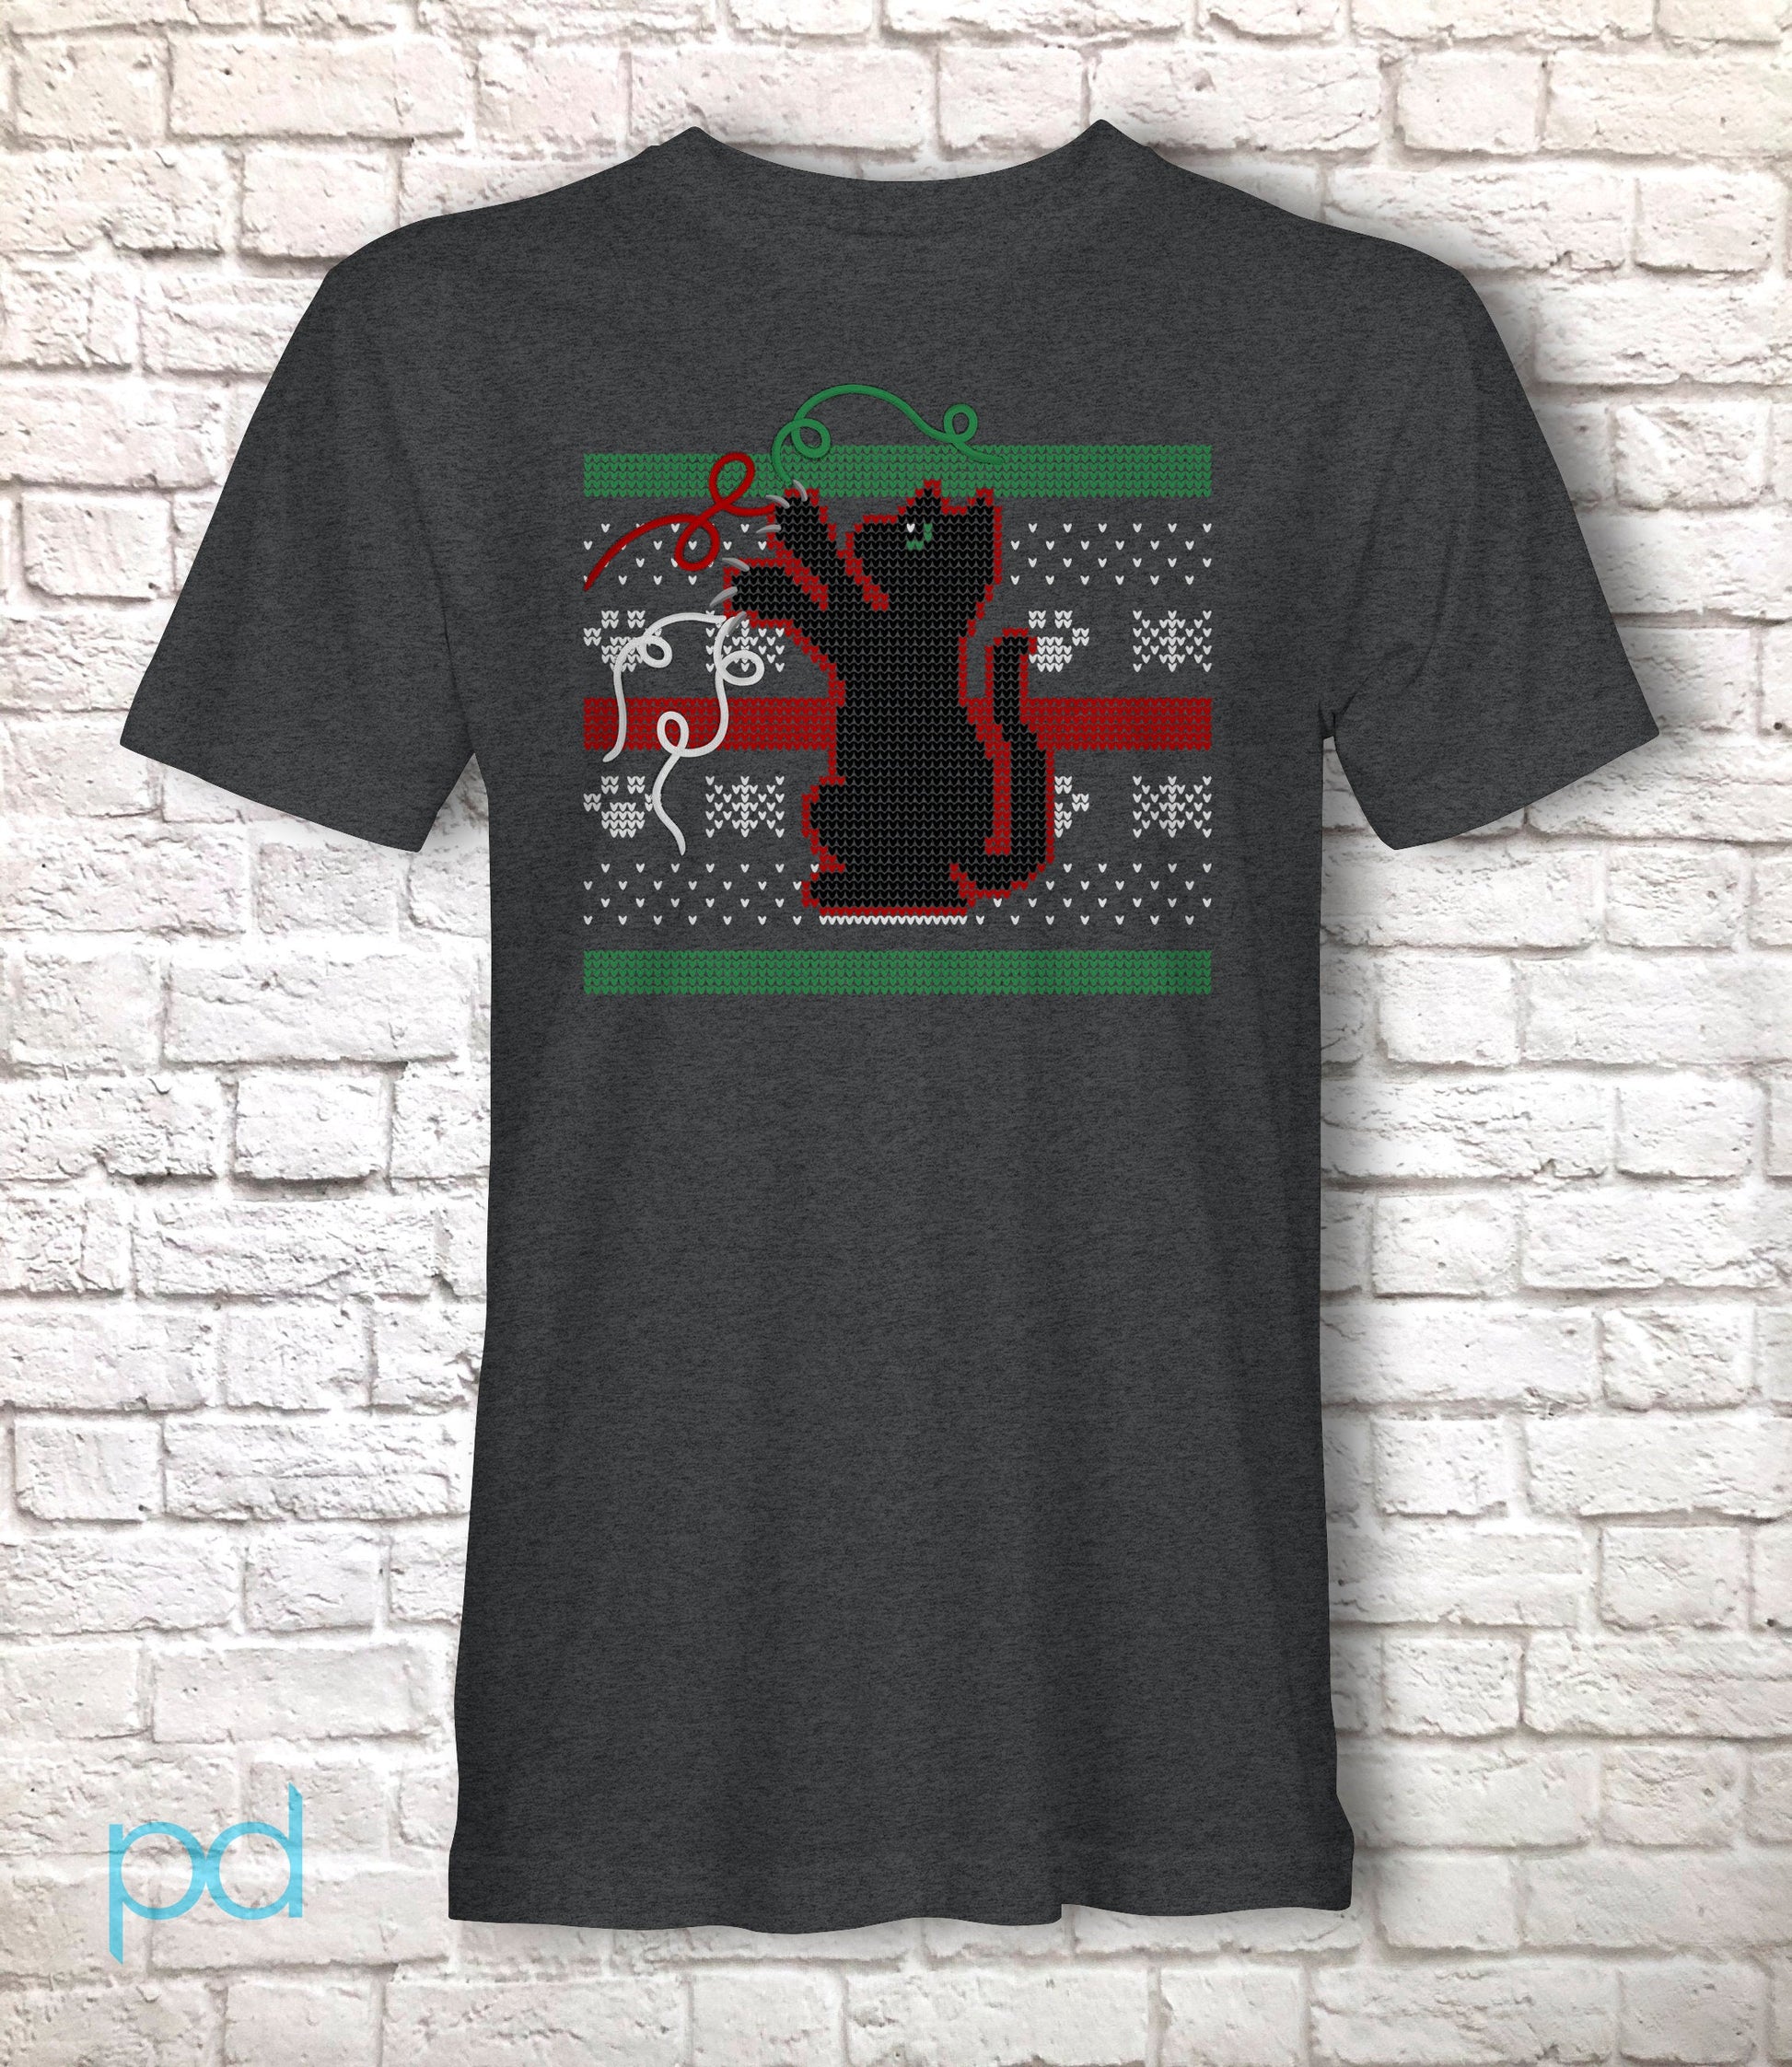 Cute Christmas Cat T-Shirt, Ugly Xmas Sweater Style Kitten Gift Idea, Black Cat Wool Thread & Stitches Graphic Tee Shirt Top